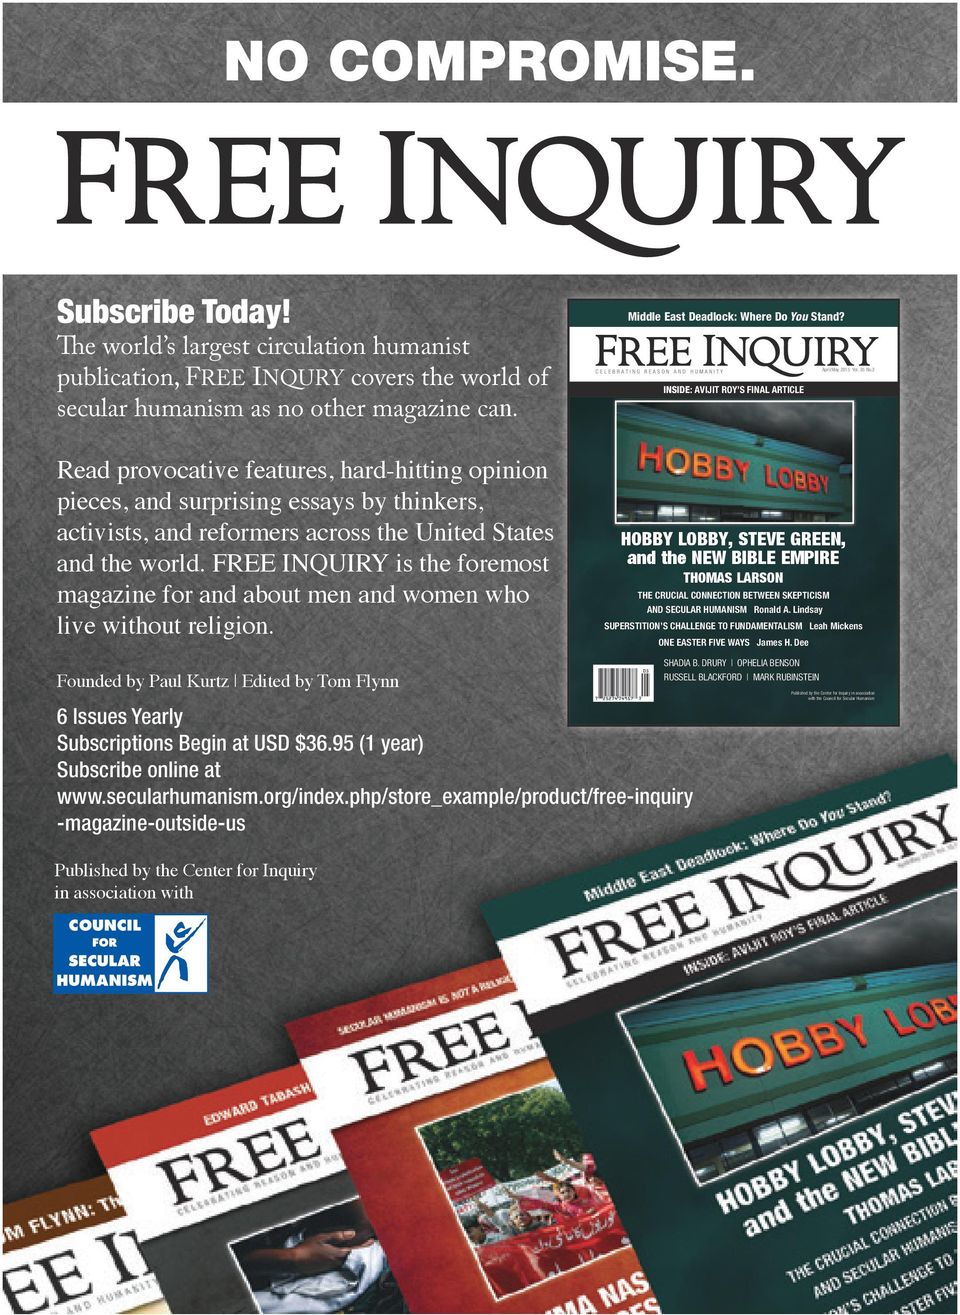 FREE INQUIRY is the foremost magazine for and about men and women who live without religion. Middle East Deadlock: Where Do You Stand?